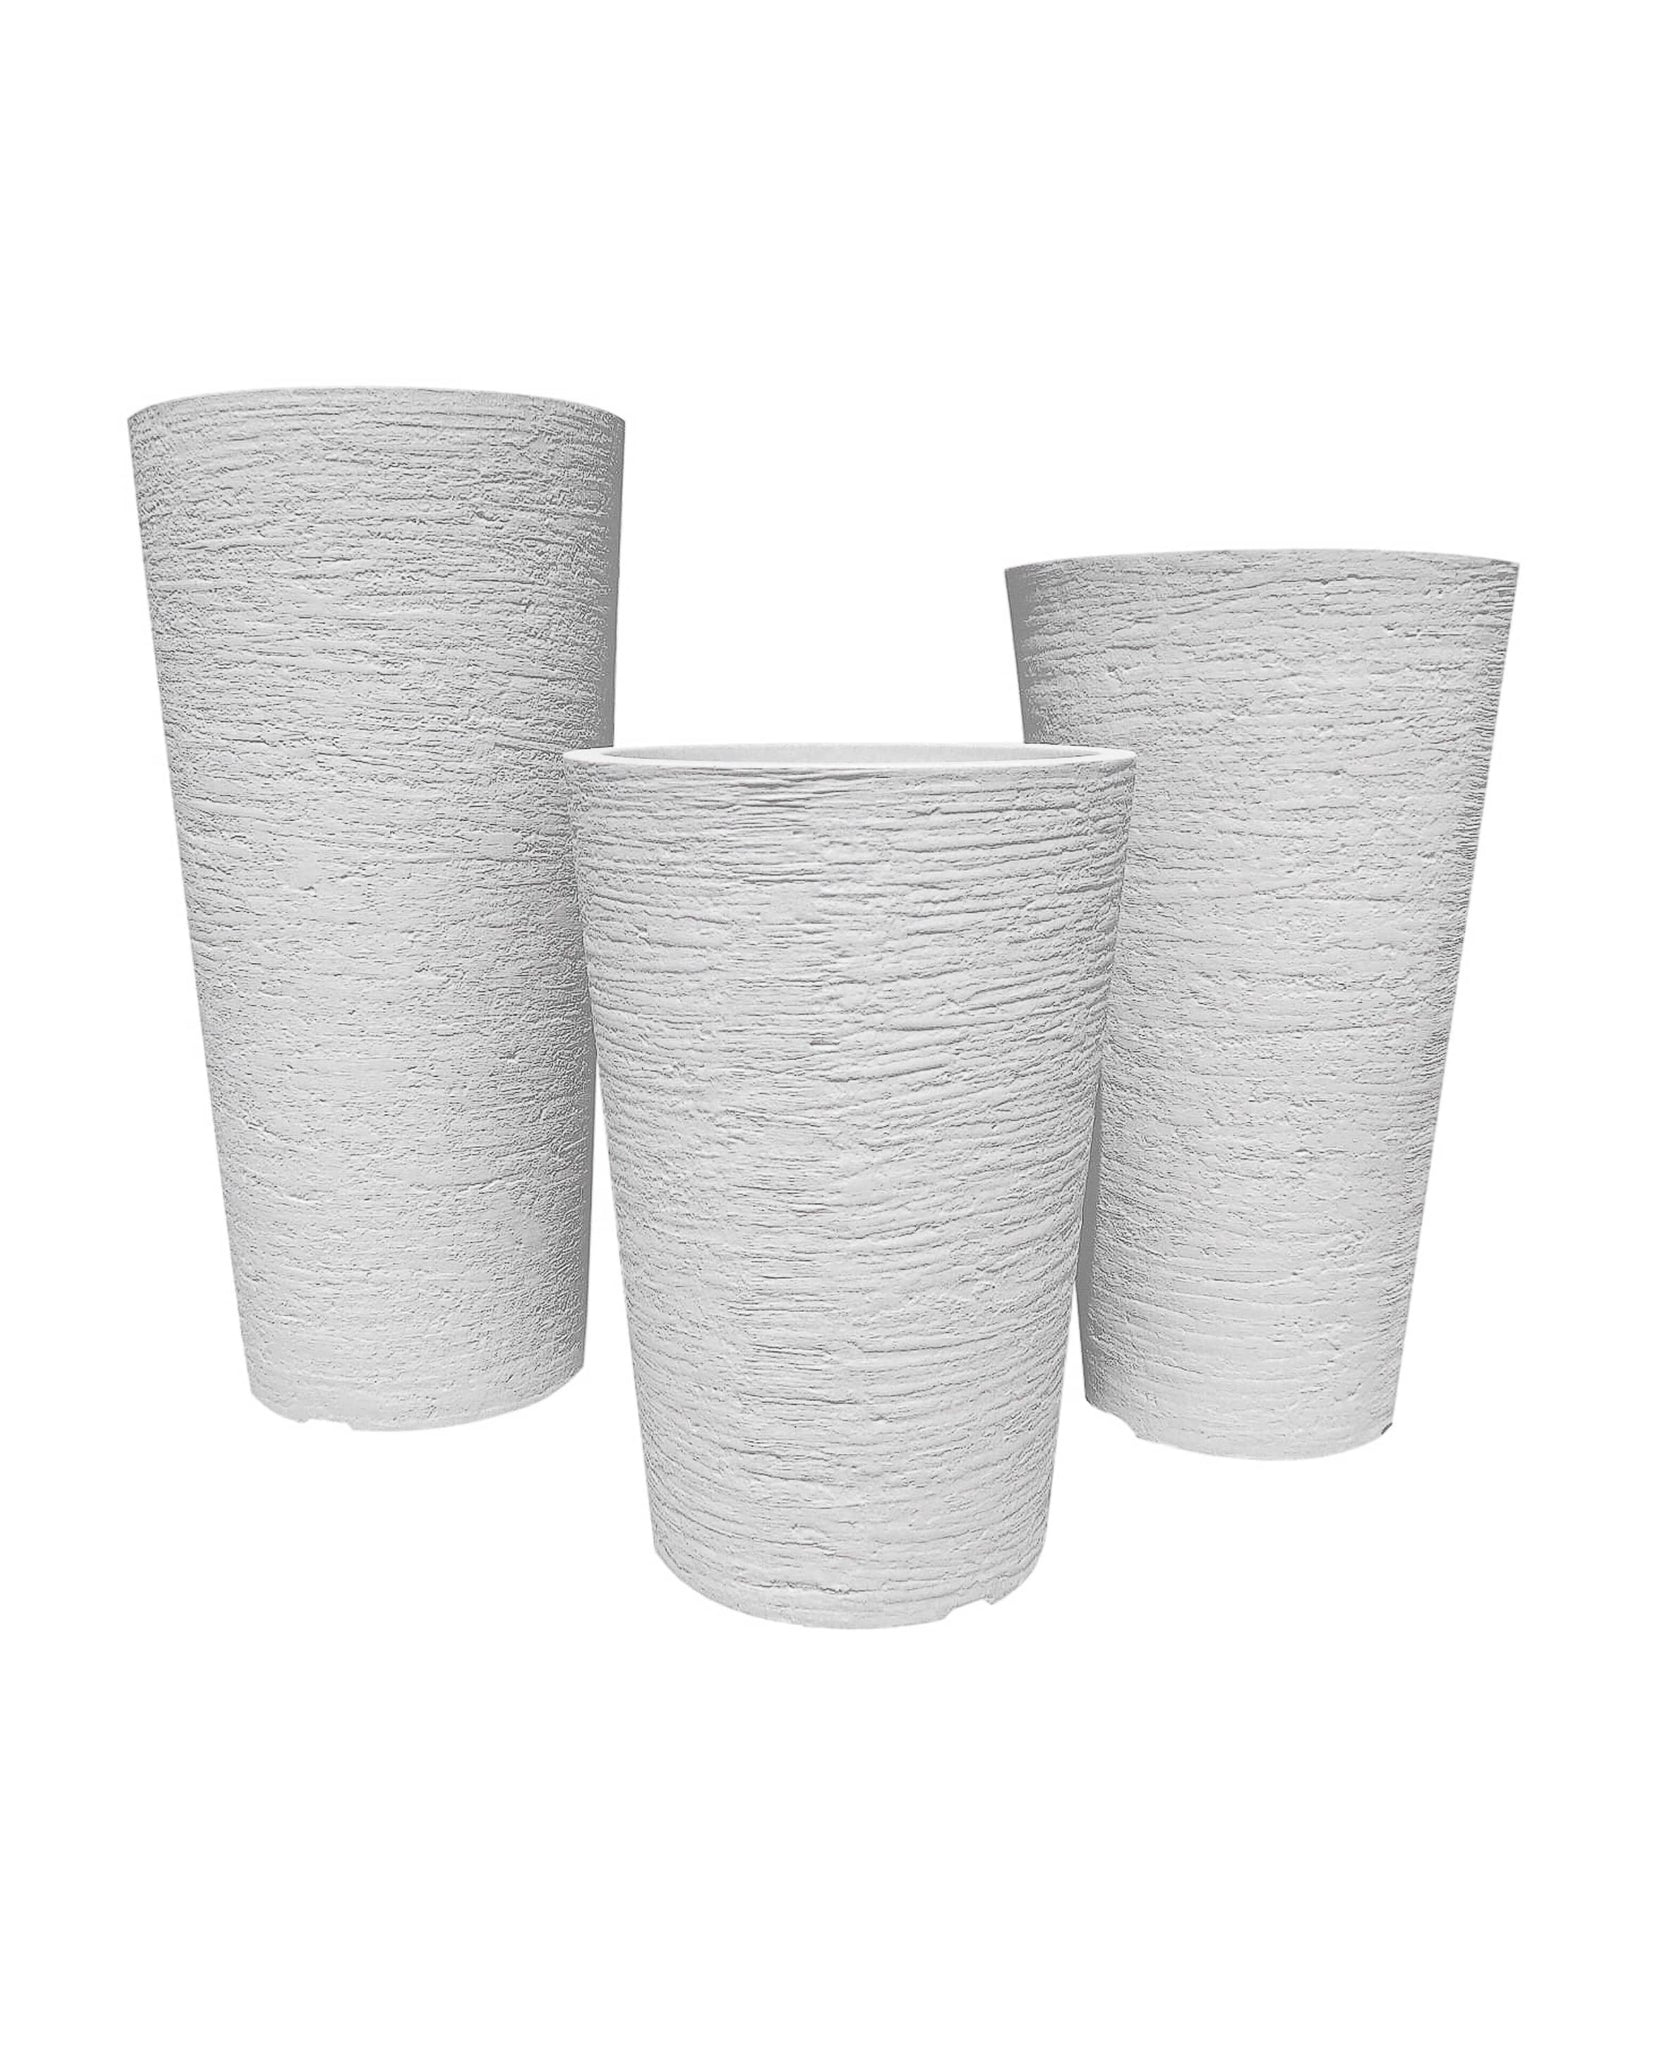 Tall slim Round Simple Planters. Textured finish. Great for the minimalist. Modern apartment living. Great for small spaces. Lightweight. Perfect in Groups or individually displayed. Colour Sandstone